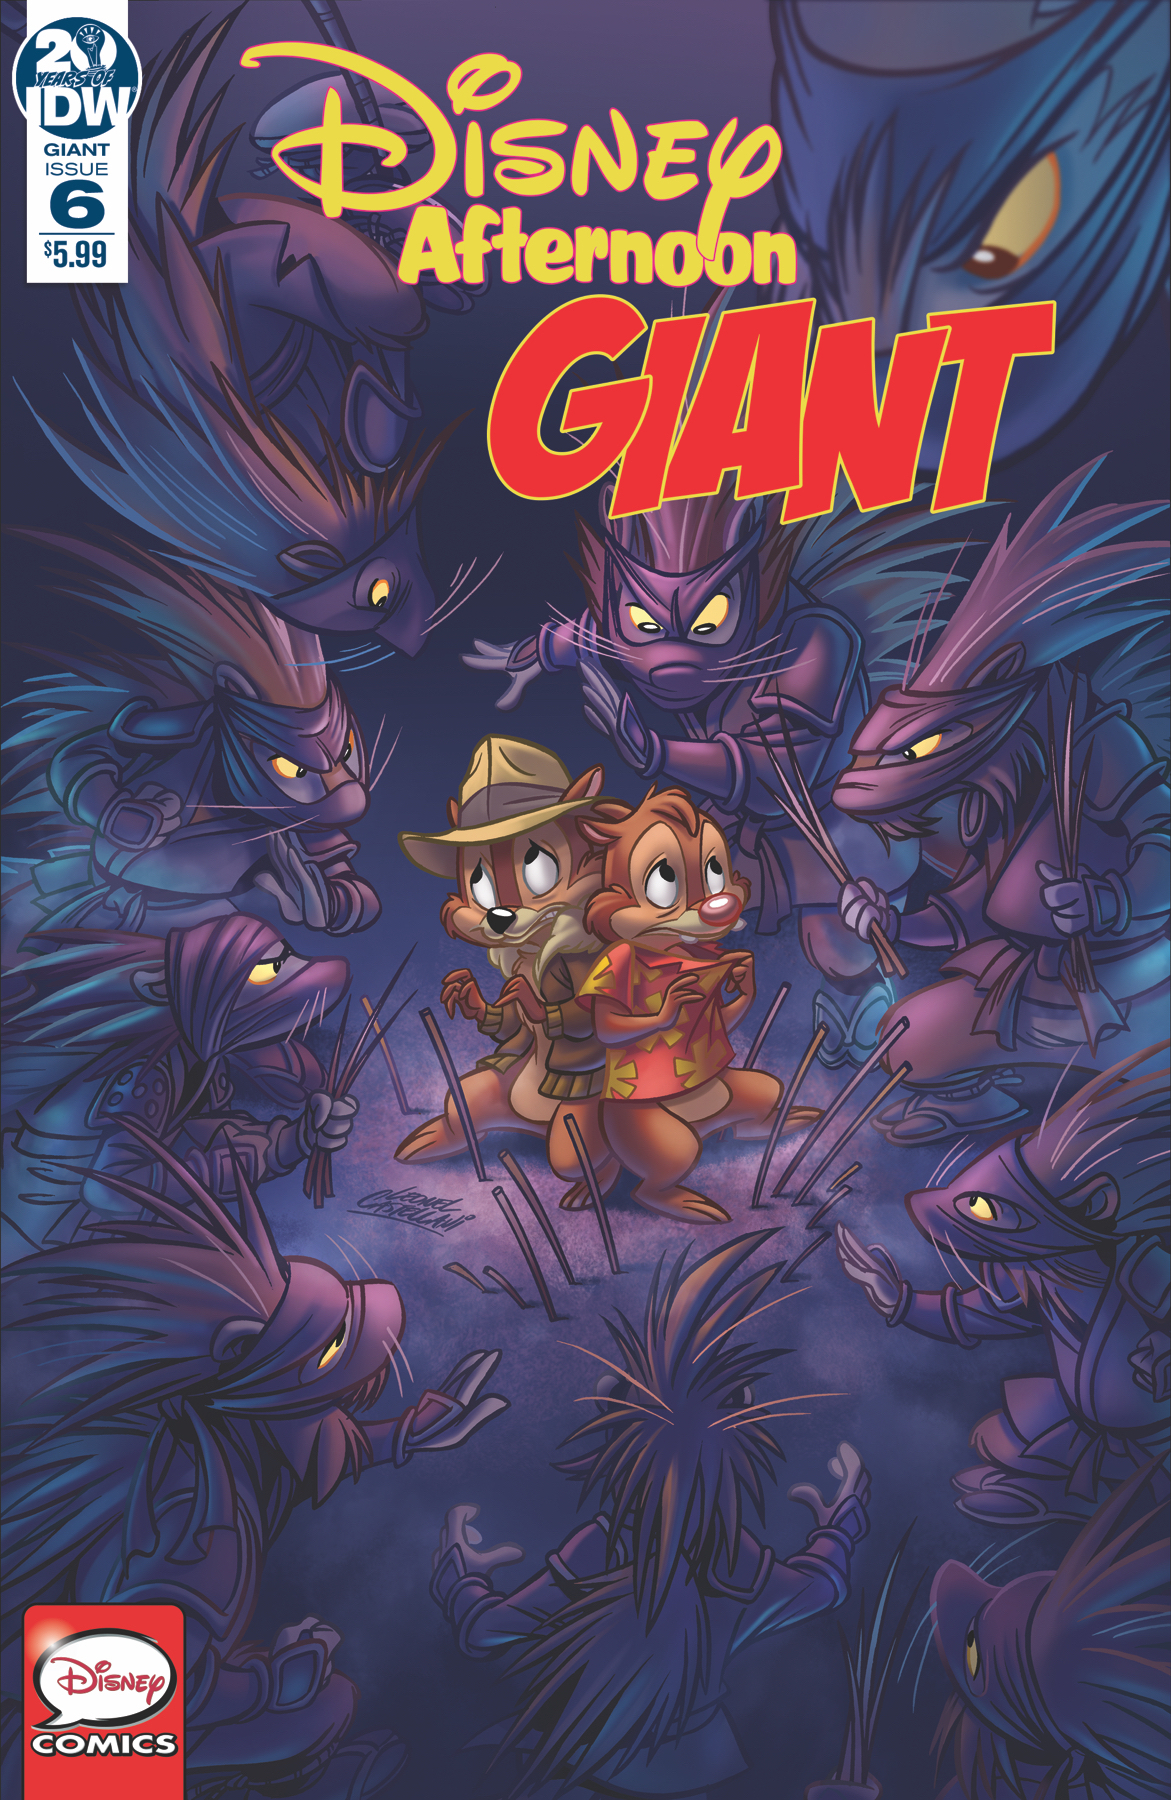 Disney Afternoon Giant no. 6 (2018 Series)